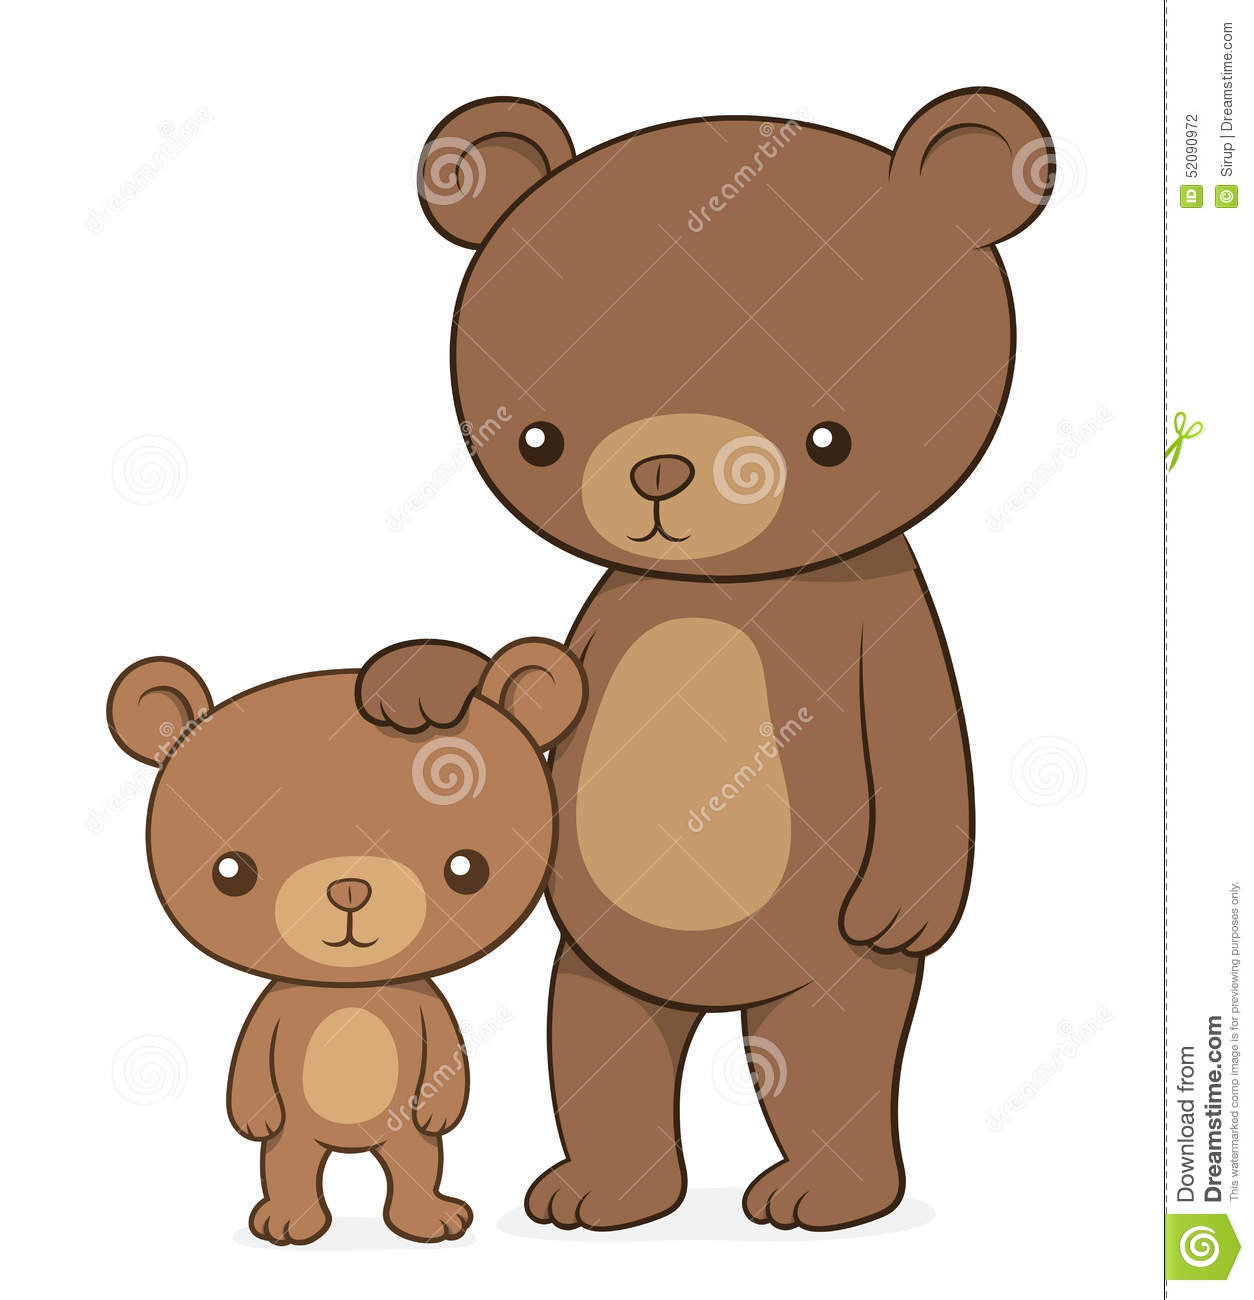 Grizzly Cubs clipart #11, Download drawings